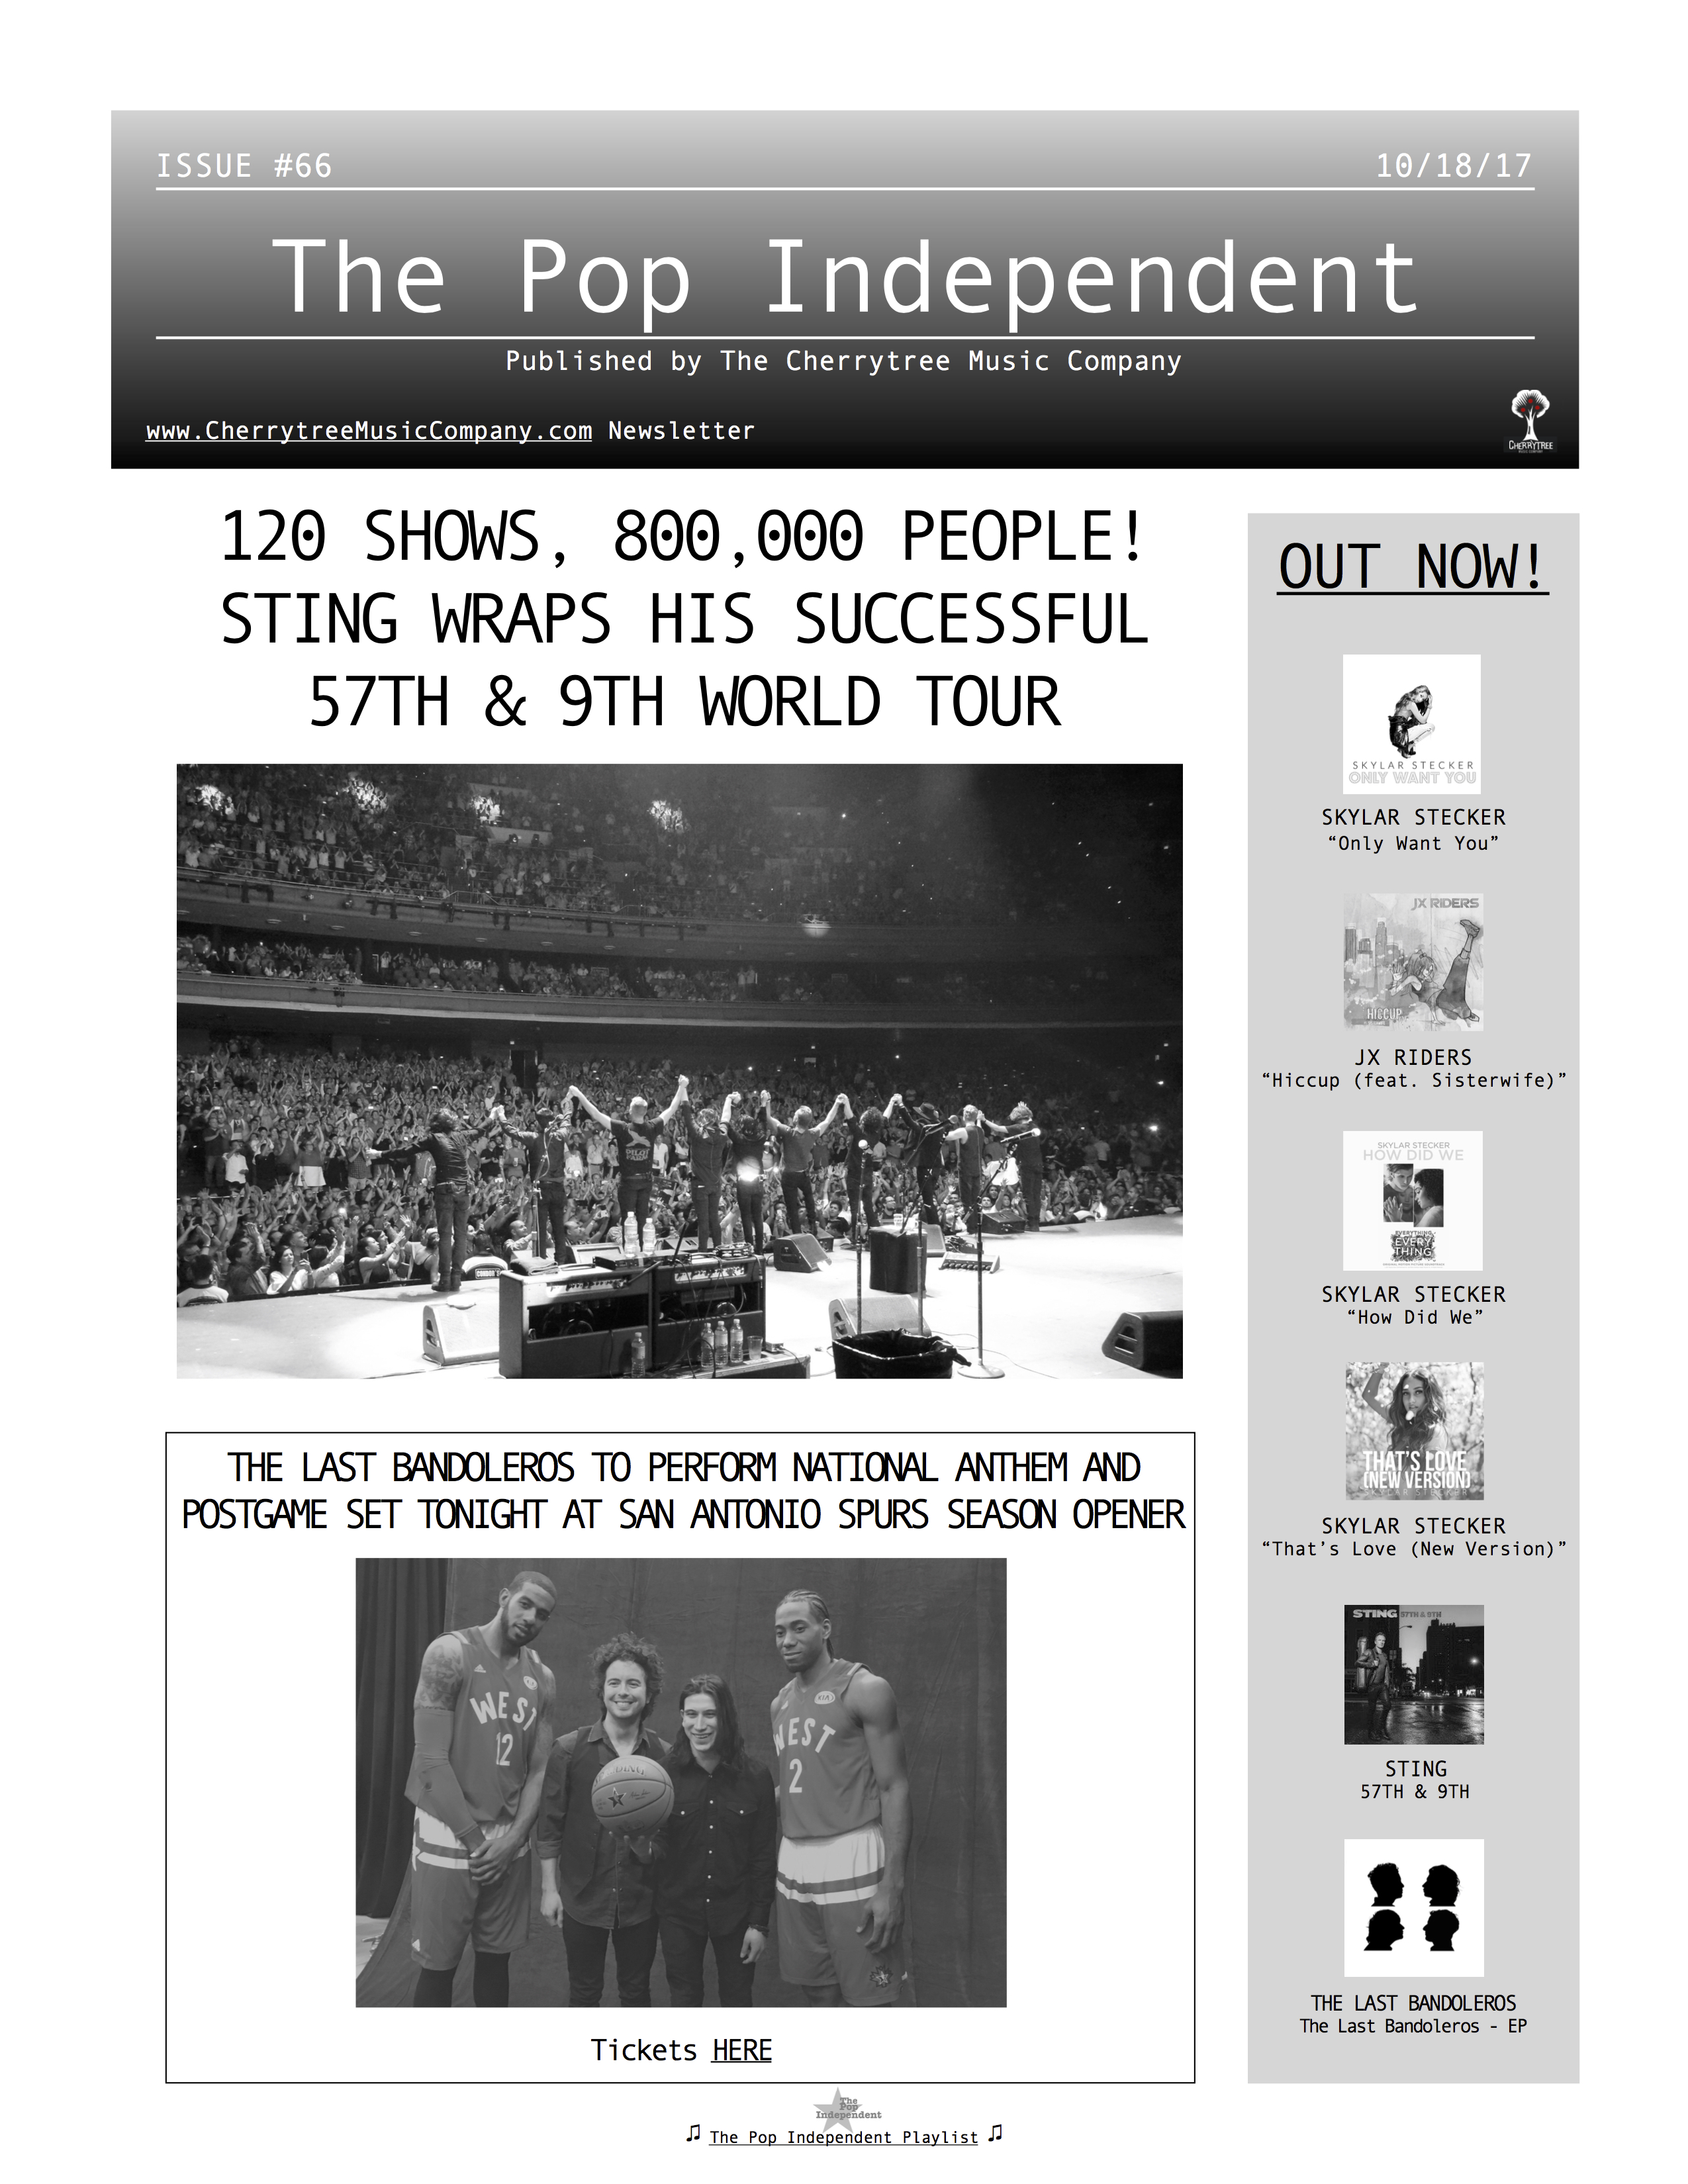 The Pop Independent, issue 66